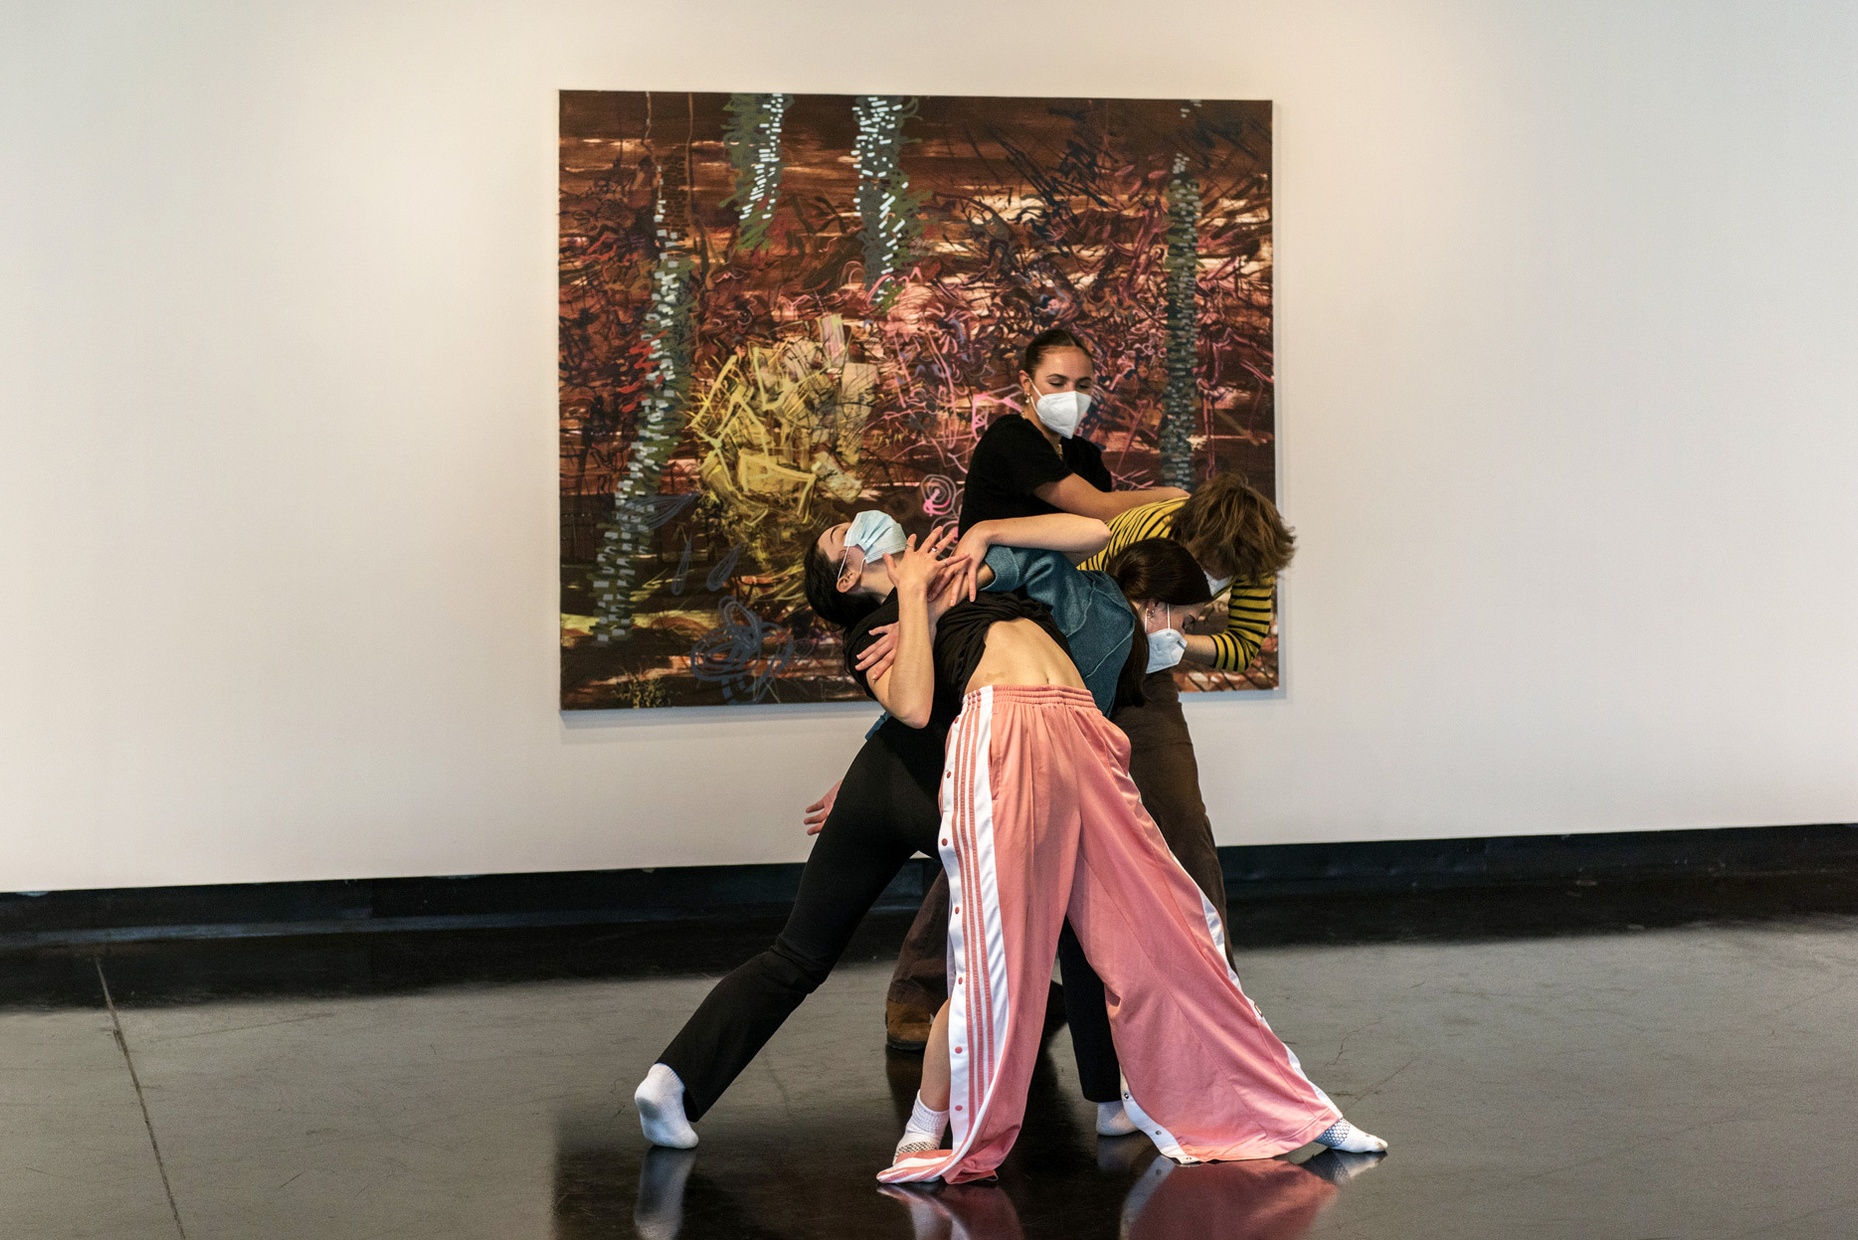 Four masked people dance together in front of an abstract painting hung on the wall behind them.